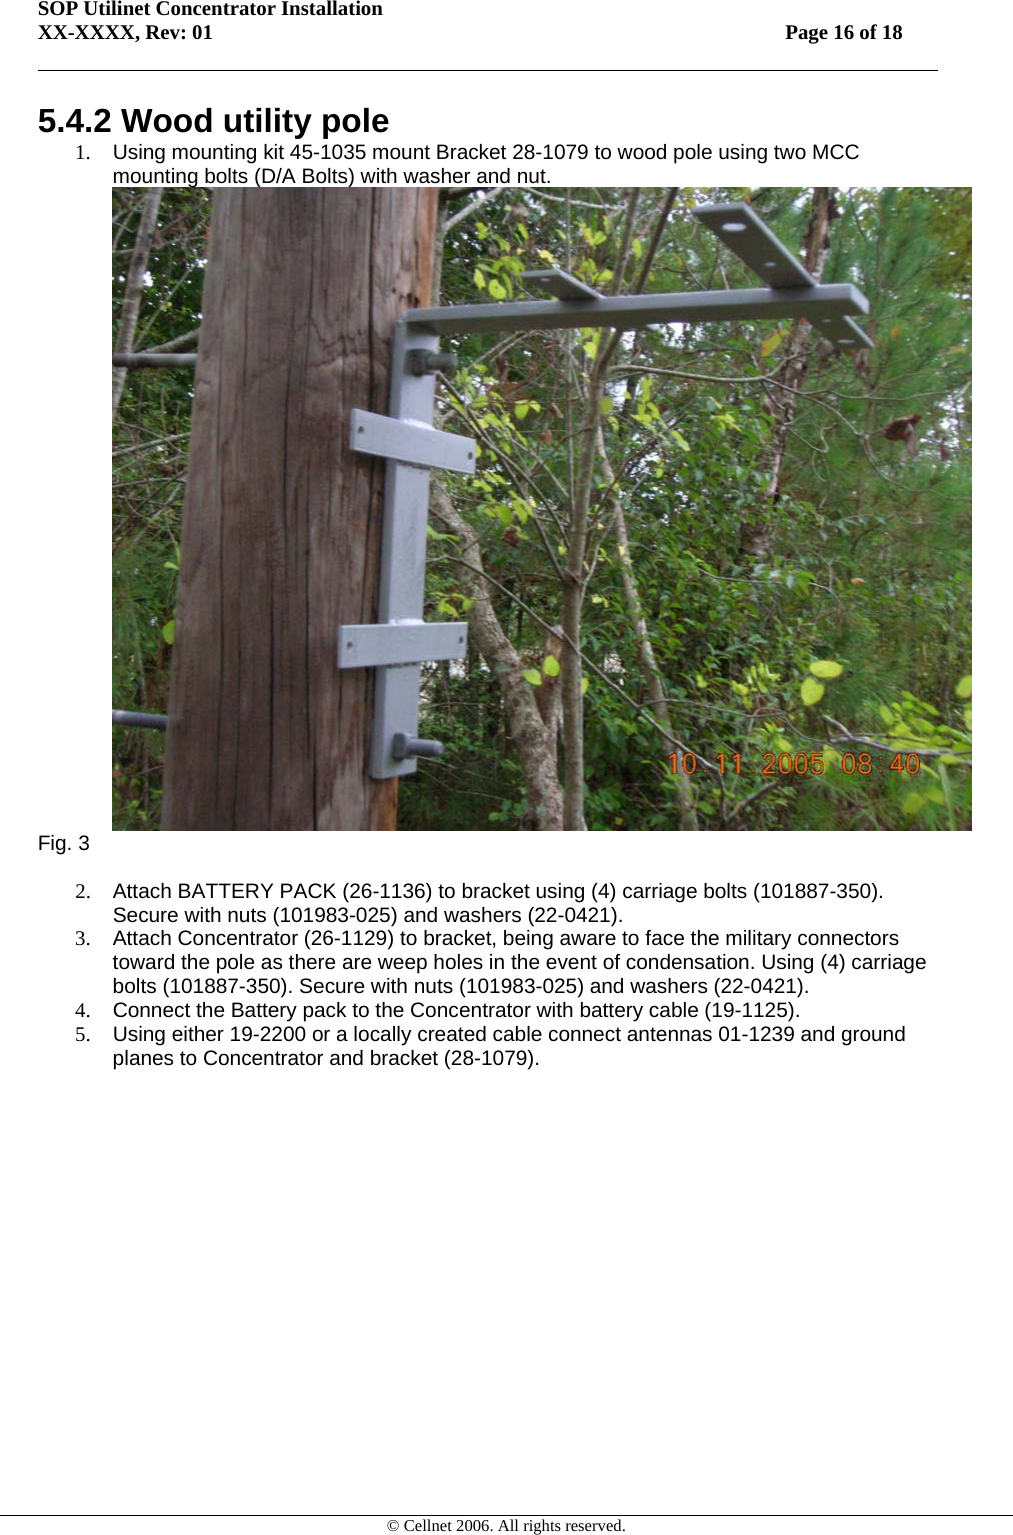 SOP Utilinet Concentrator Installation XX-XXXX, Rev: 01 Page 16 of 18         © Cellnet 2006. All rights reserved. 5.4.2 Wood utility pole 1.  Using mounting kit 45-1035 mount Bracket 28-1079 to wood pole using two MCC mounting bolts (D/A Bolts) with washer and nut.  Fig. 3  2.  Attach BATTERY PACK (26-1136) to bracket using (4) carriage bolts (101887-350). Secure with nuts (101983-025) and washers (22-0421). 3. Attach Concentrator (26-1129) to bracket, being aware to face the military connectors toward the pole as there are weep holes in the event of condensation. Using (4) carriage bolts (101887-350). Secure with nuts (101983-025) and washers (22-0421).  4.  Connect the Battery pack to the Concentrator with battery cable (19-1125). 5.  Using either 19-2200 or a locally created cable connect antennas 01-1239 and ground planes to Concentrator and bracket (28-1079).  